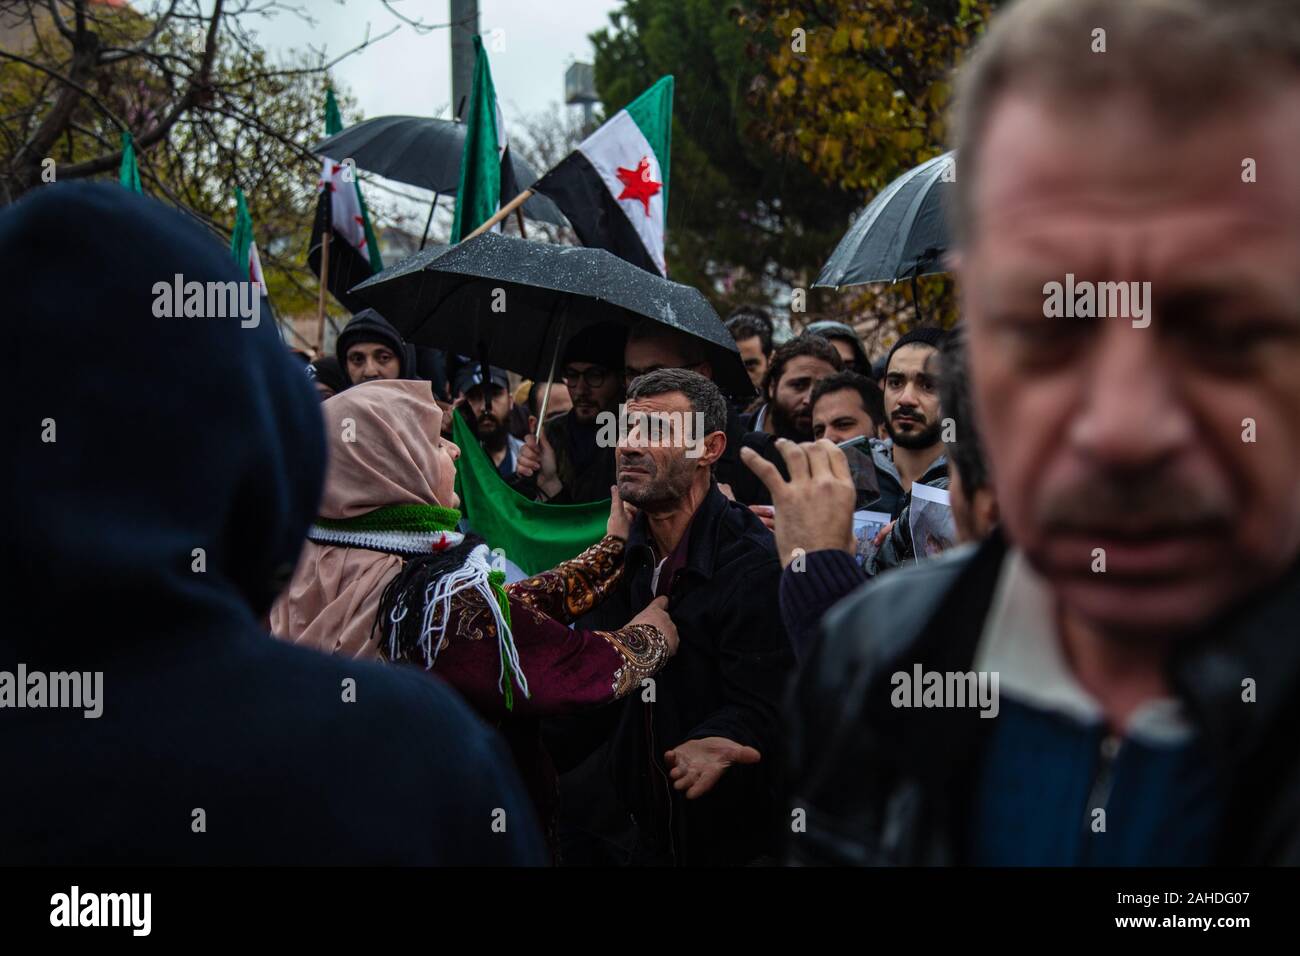 A protester chants slogans during the demonstration.A group of Syrian refugees in Turkey, the city of Gaziantep protest in solidarity with the people in Syria and also hold signs calling for an end to the bombing of the city of Idlib by Russia and the Assad regime. Stock Photo